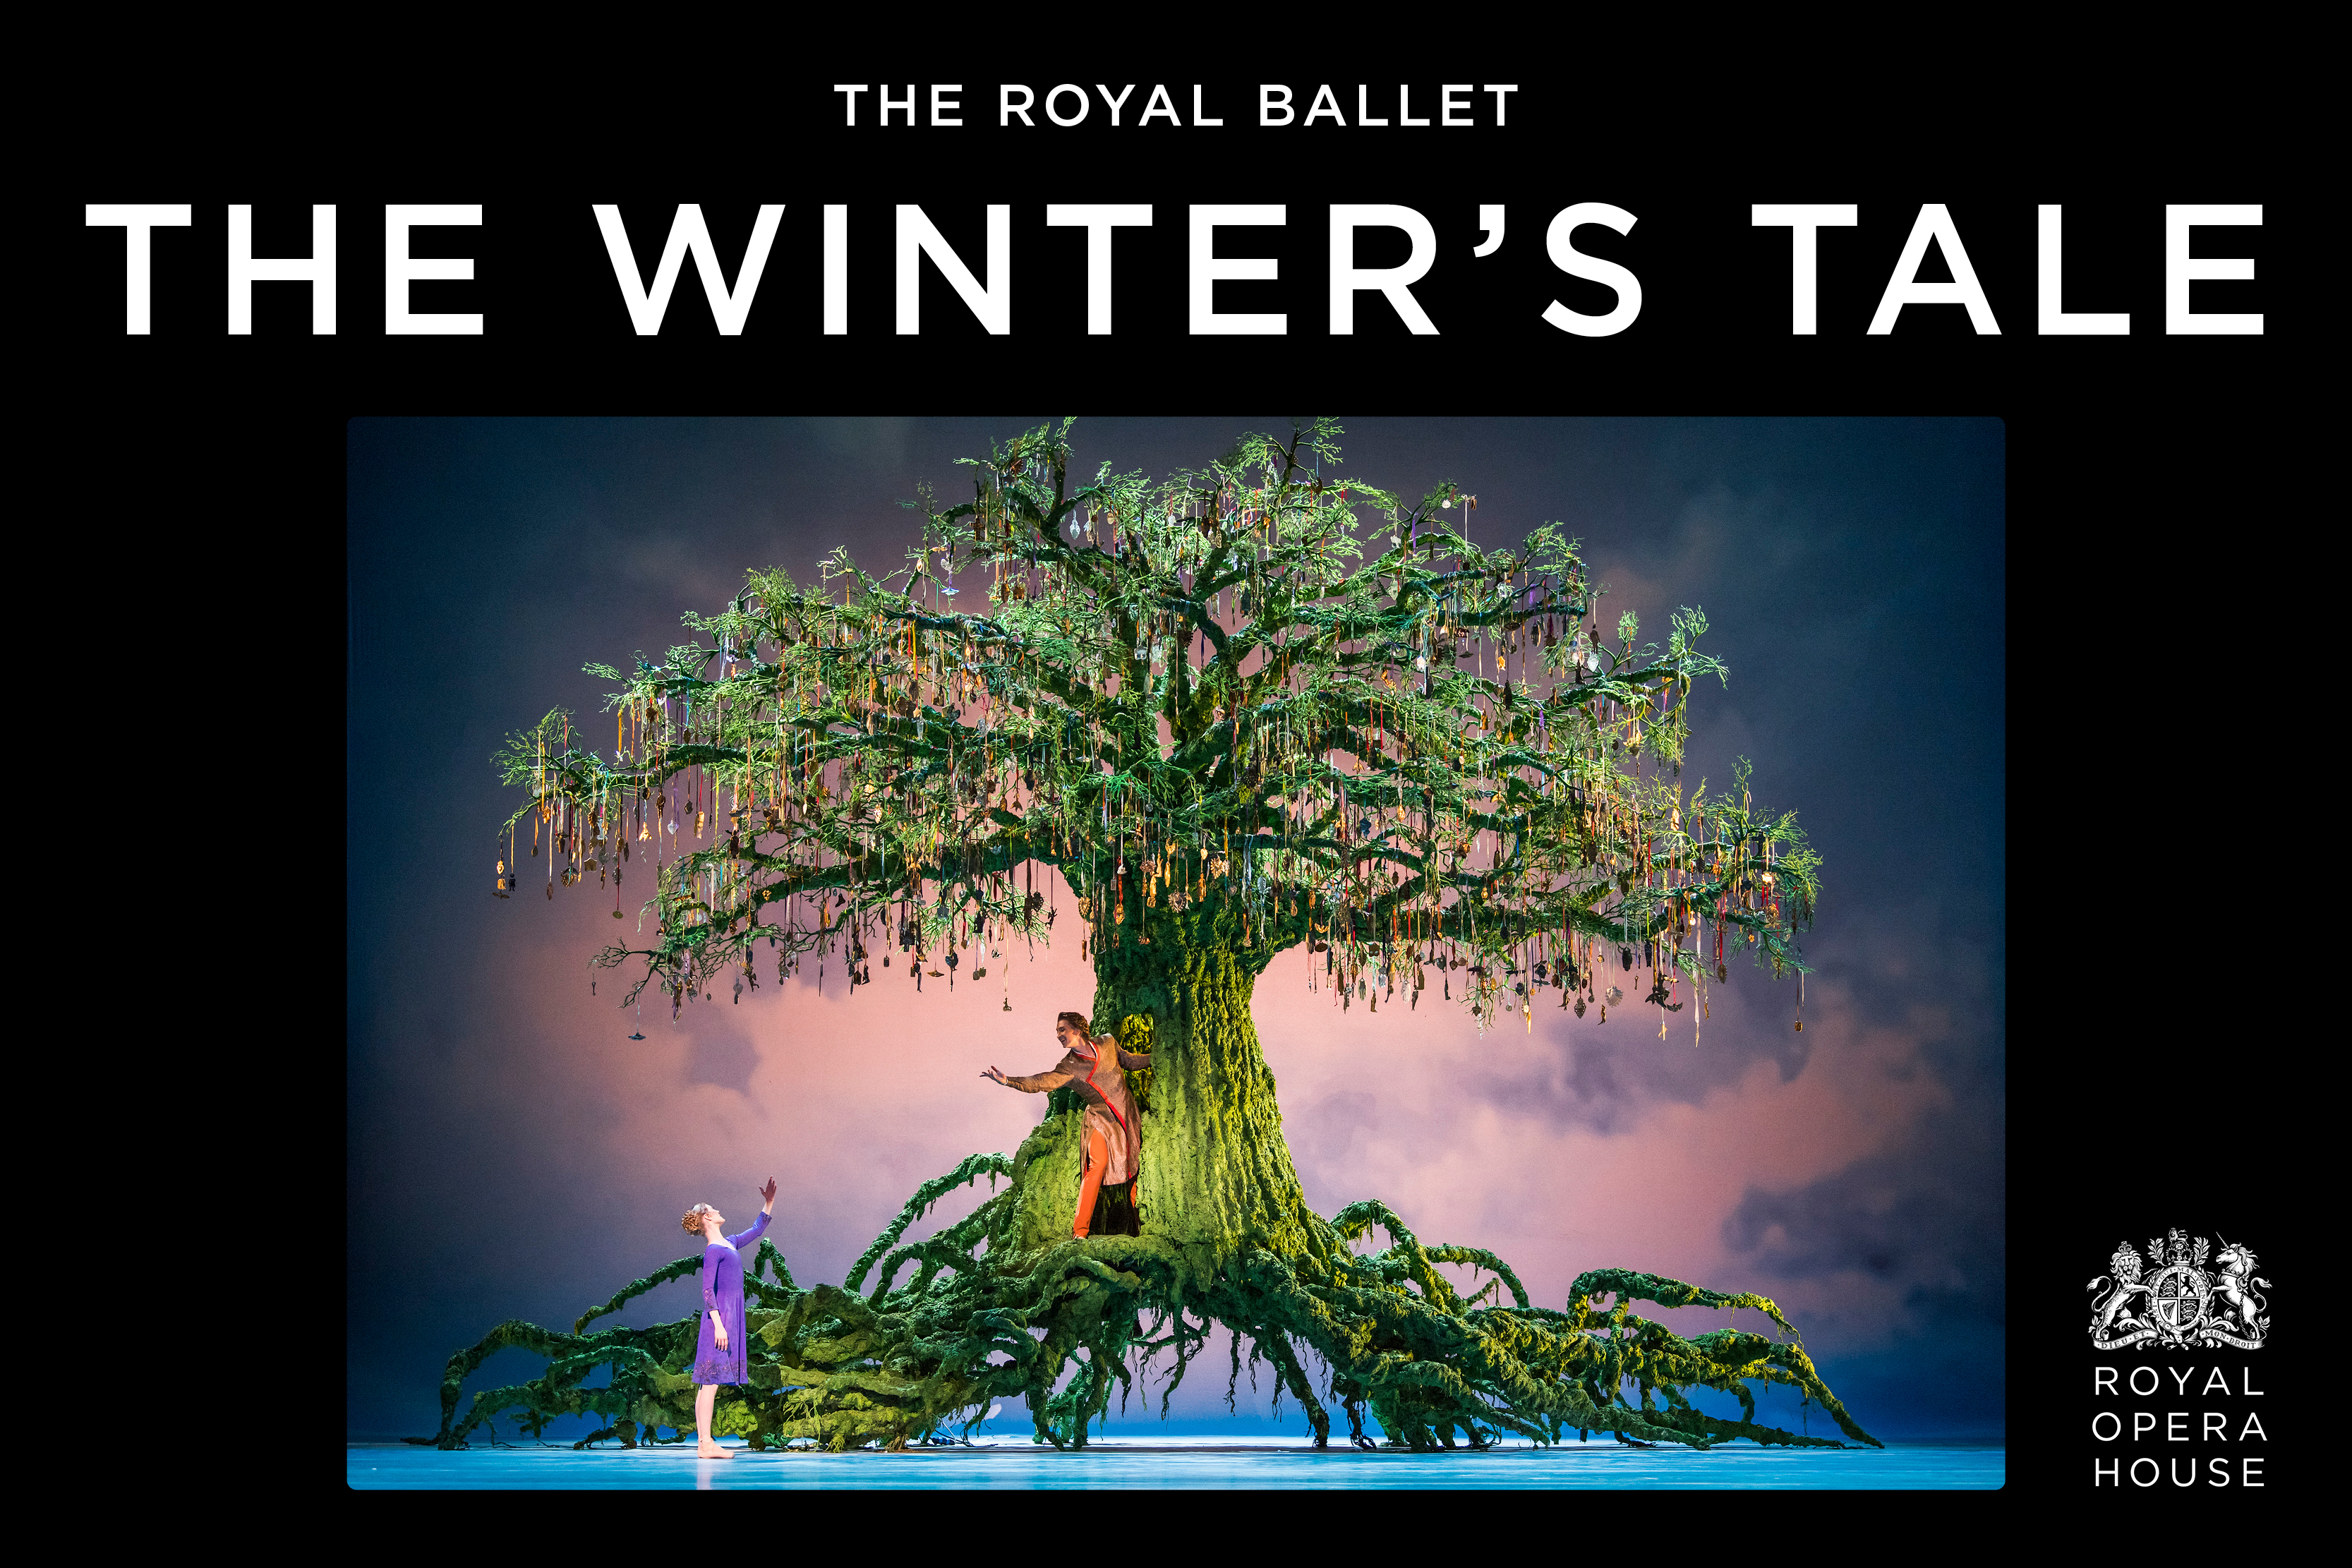 The Royal Ballet Live presents The Winter's Tale - Shakespeare’s profound story of love and loss adapted into a contemporary ballet